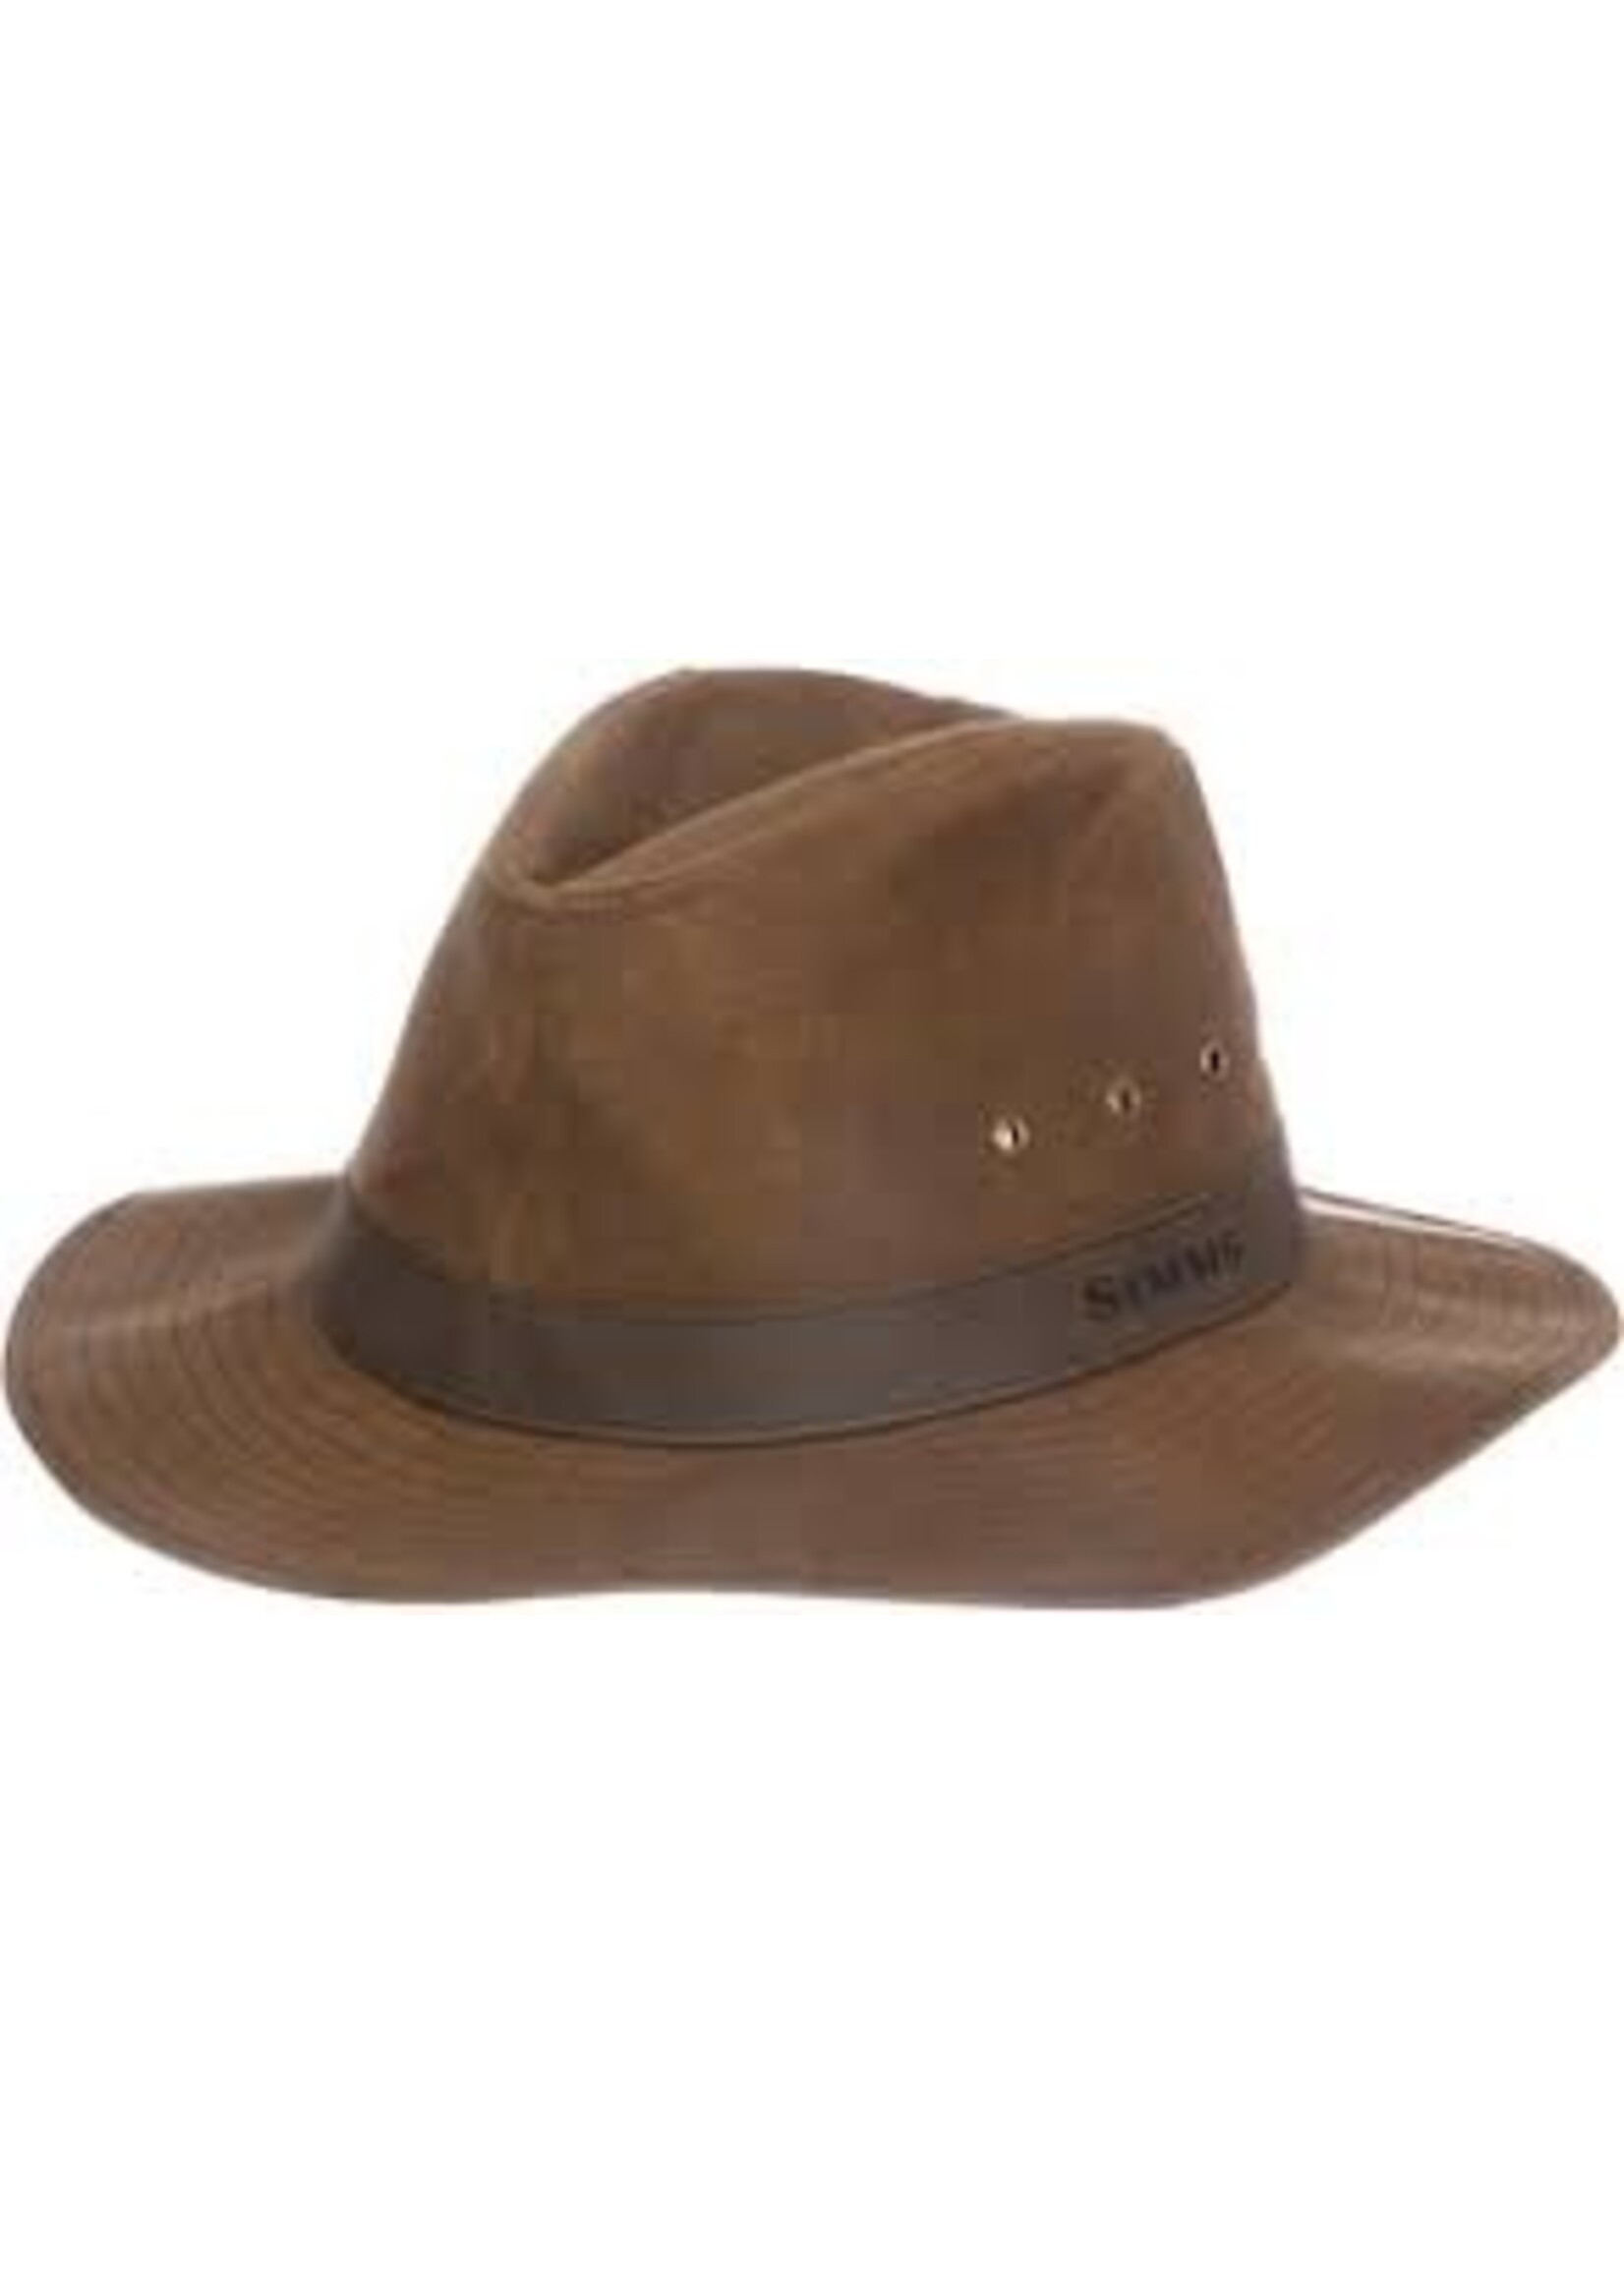 Simms Simms Guide Classic Hat S/M